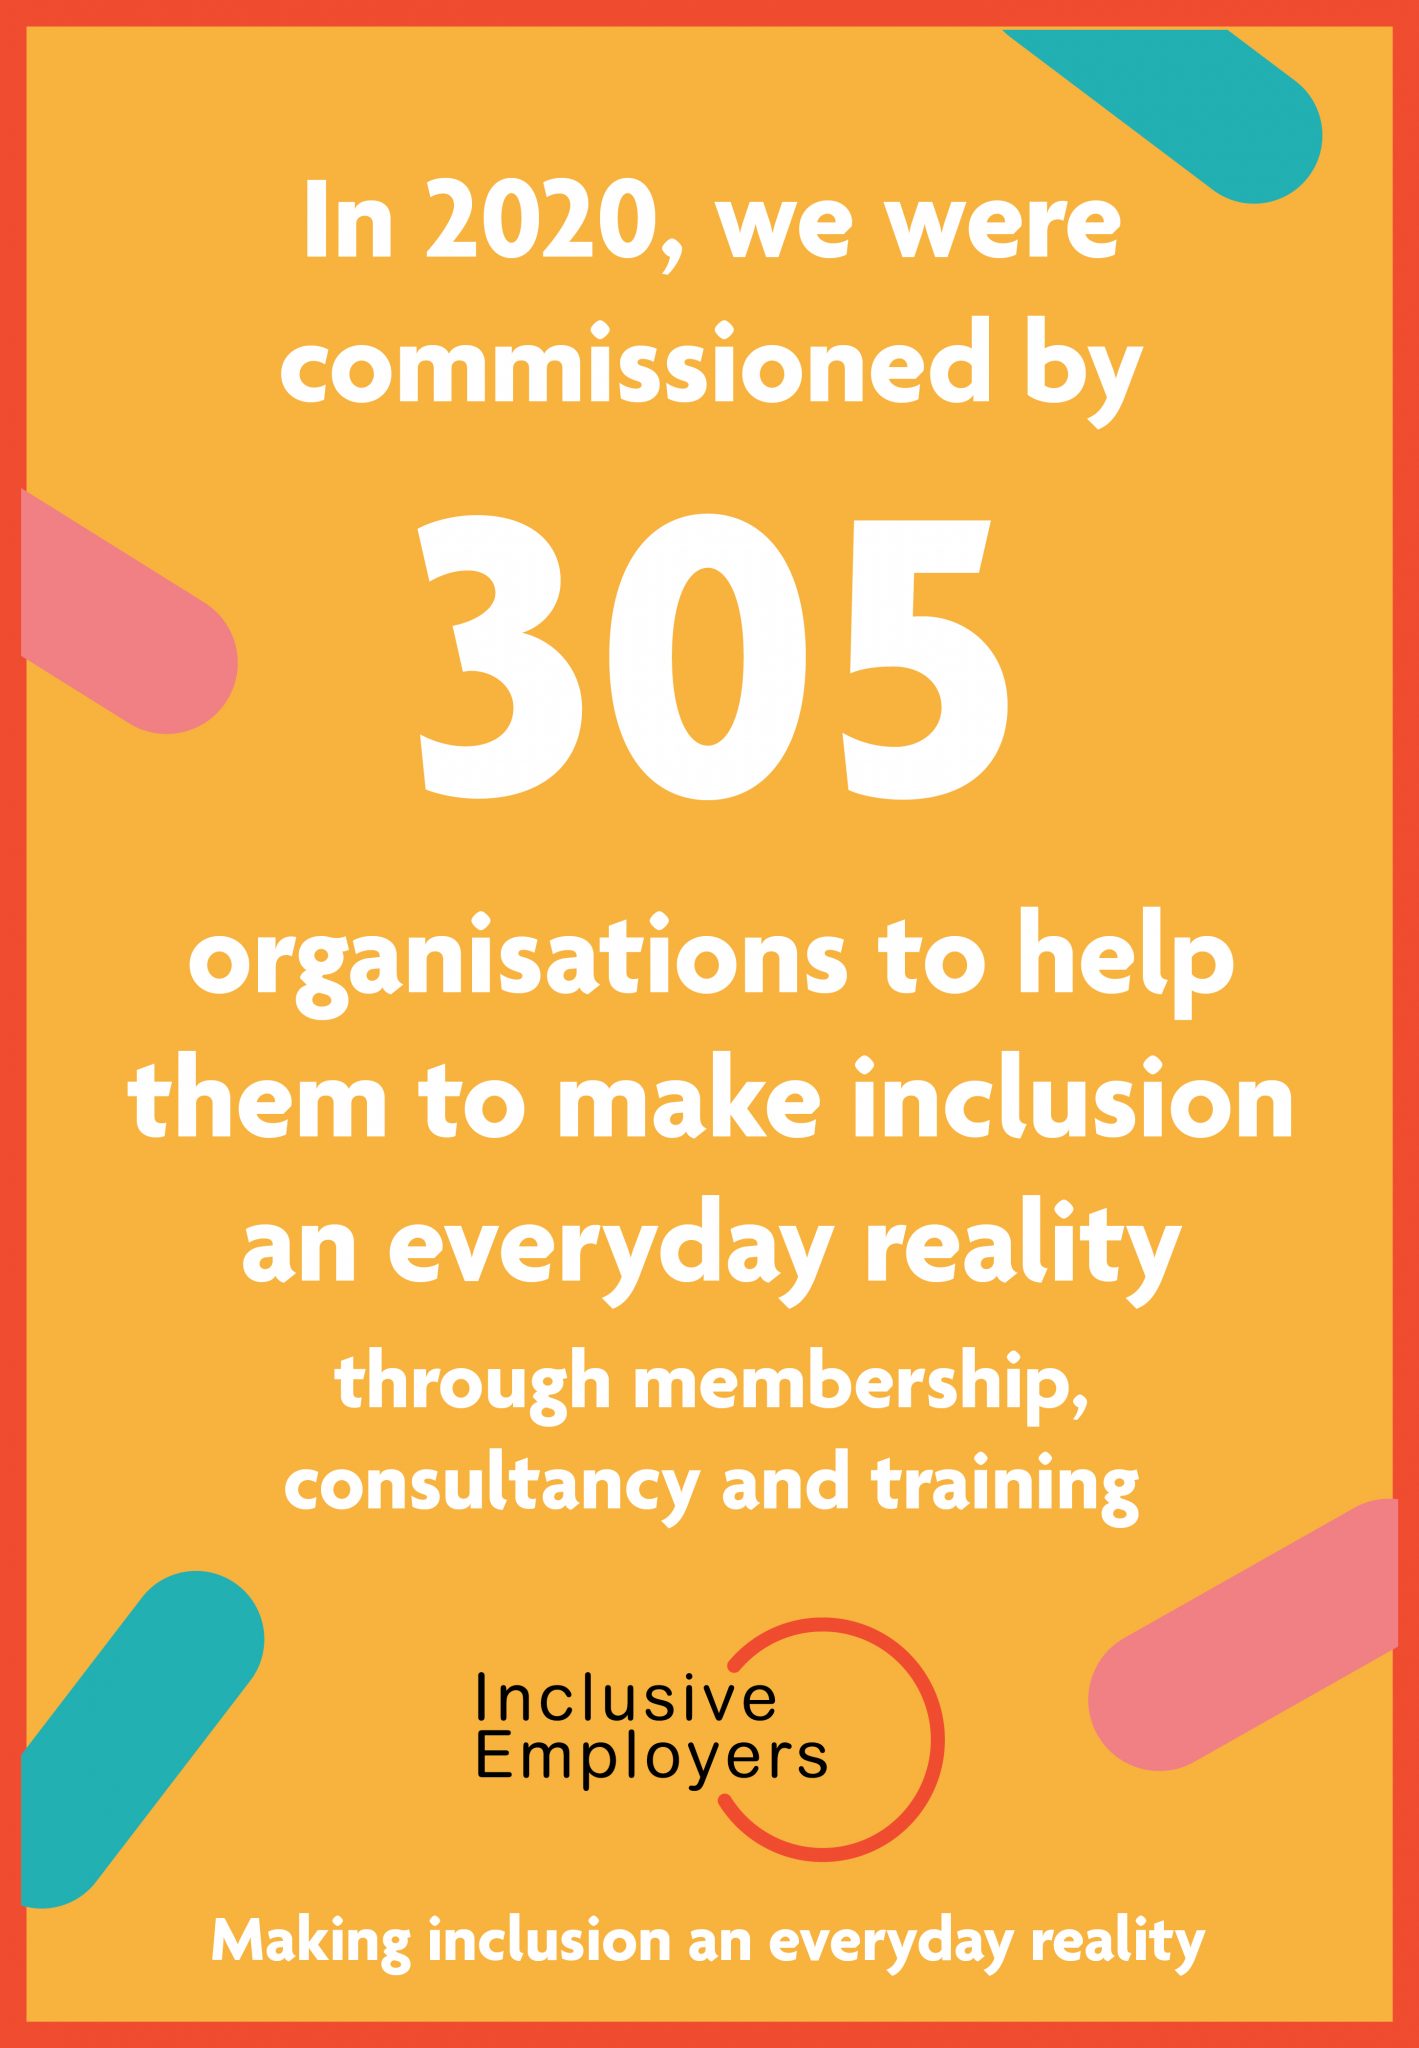 How Inclusive Employer’s membership supported our inclusion agenda